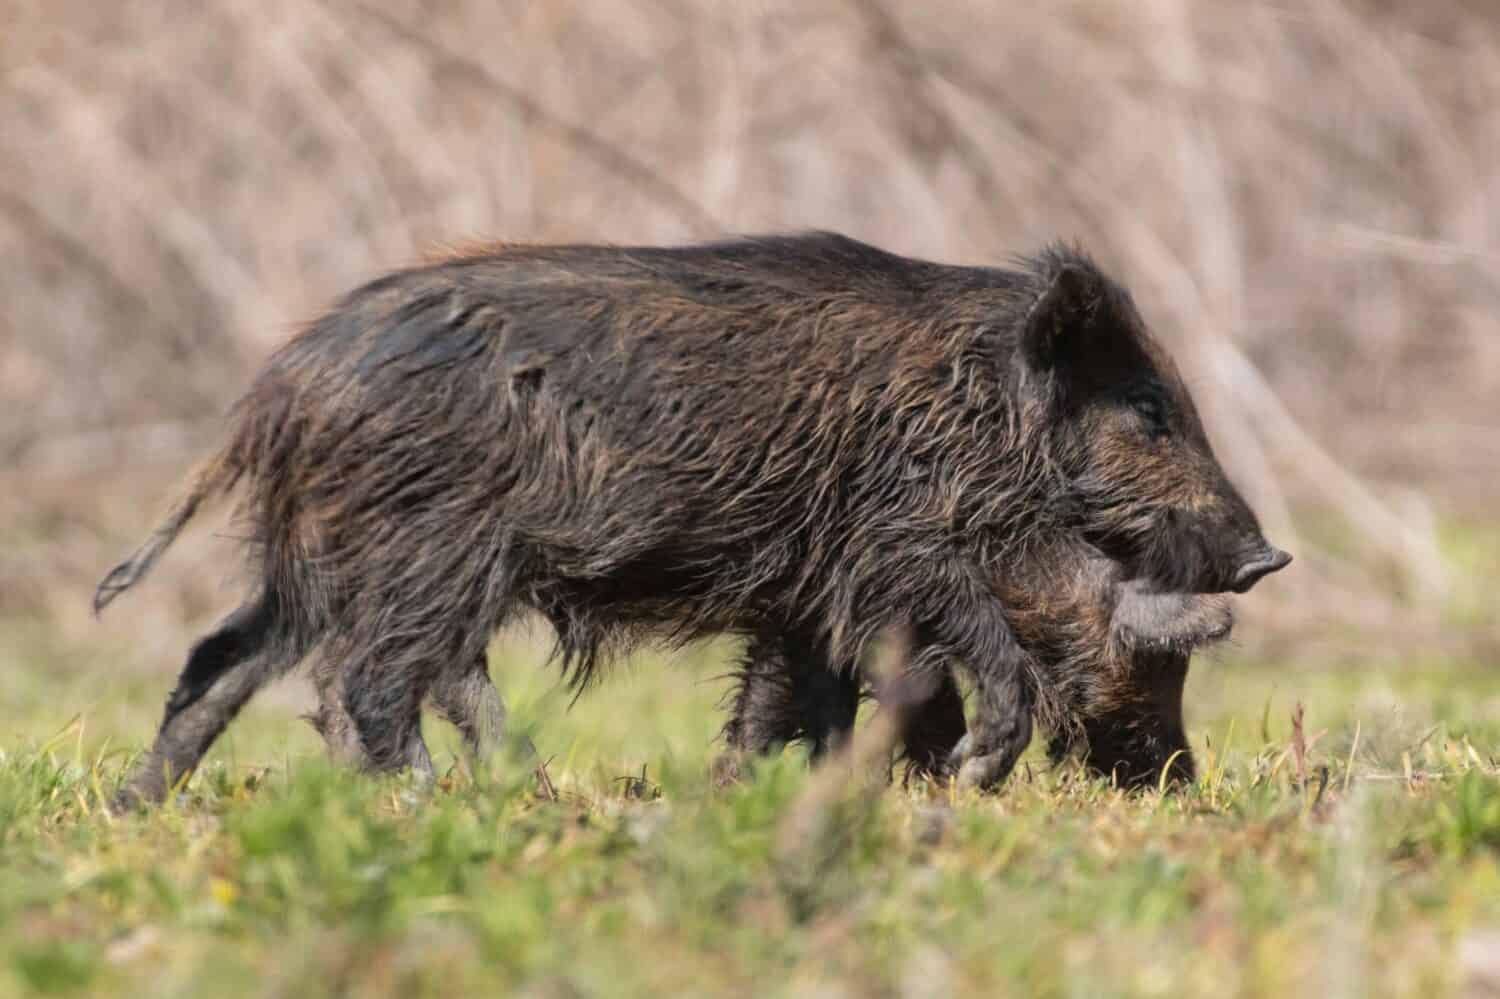 Wild boar grazing and digging up mud in a California County Park